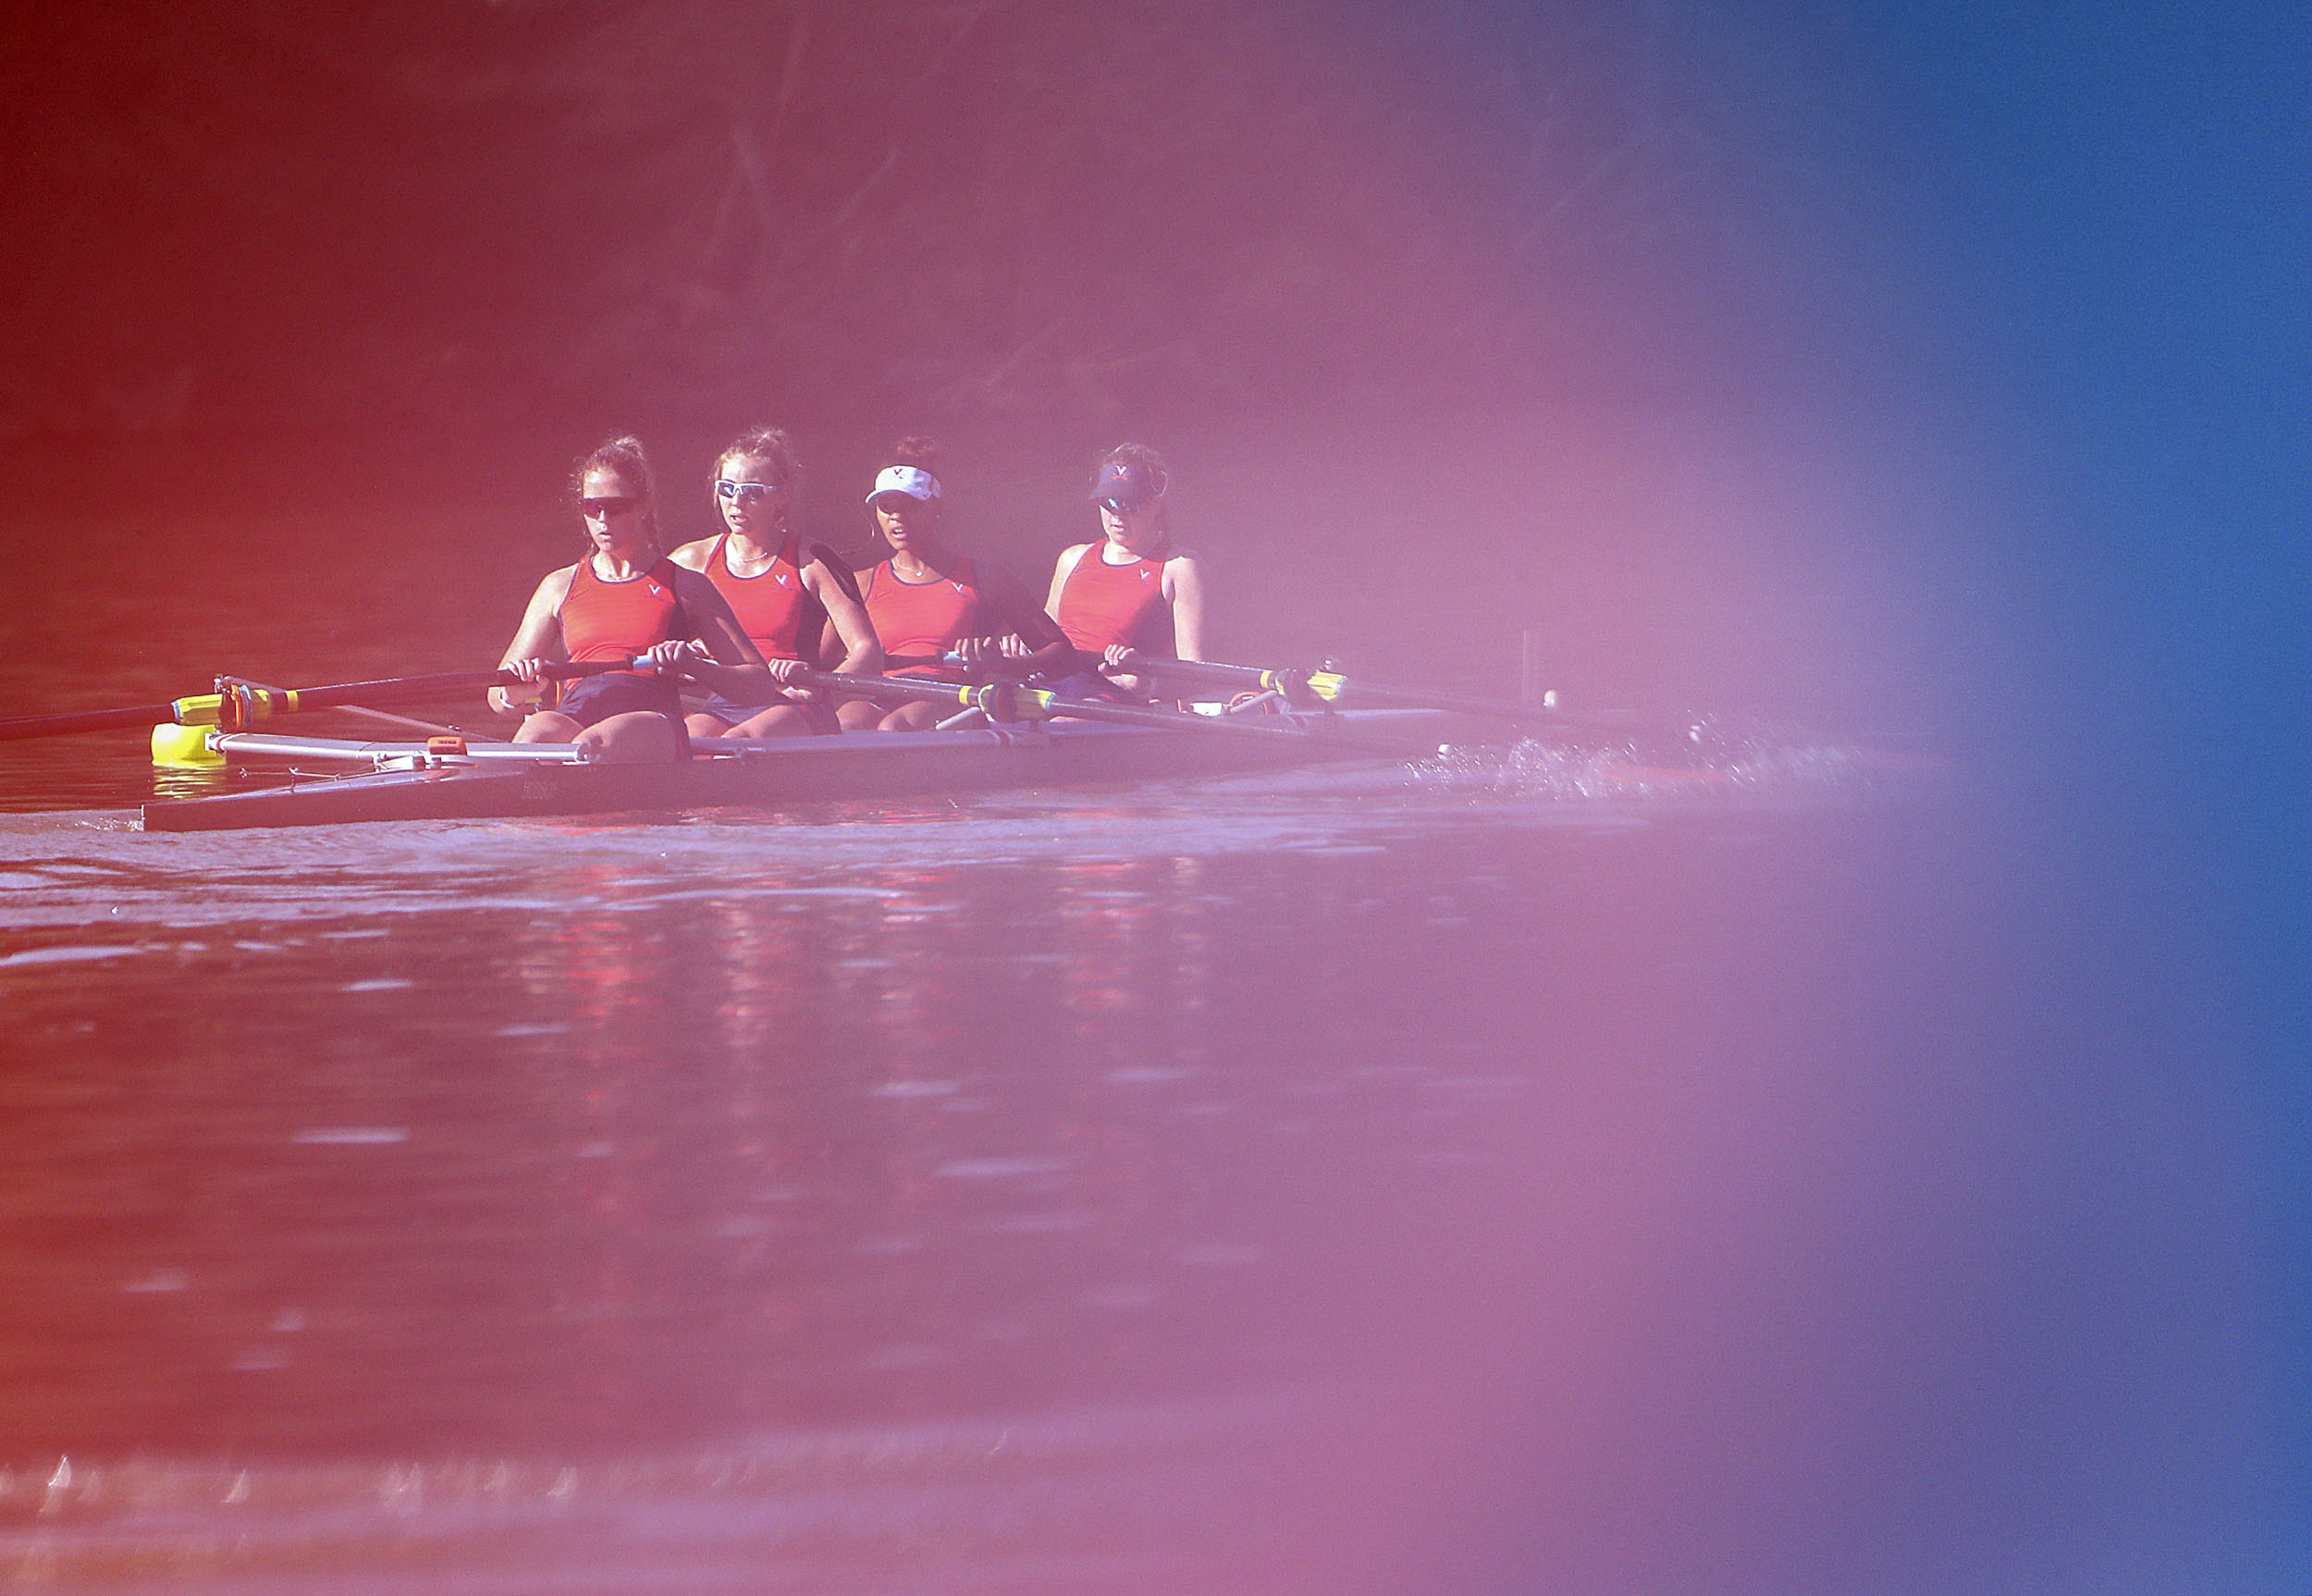 UVA Womens rowing team on the water